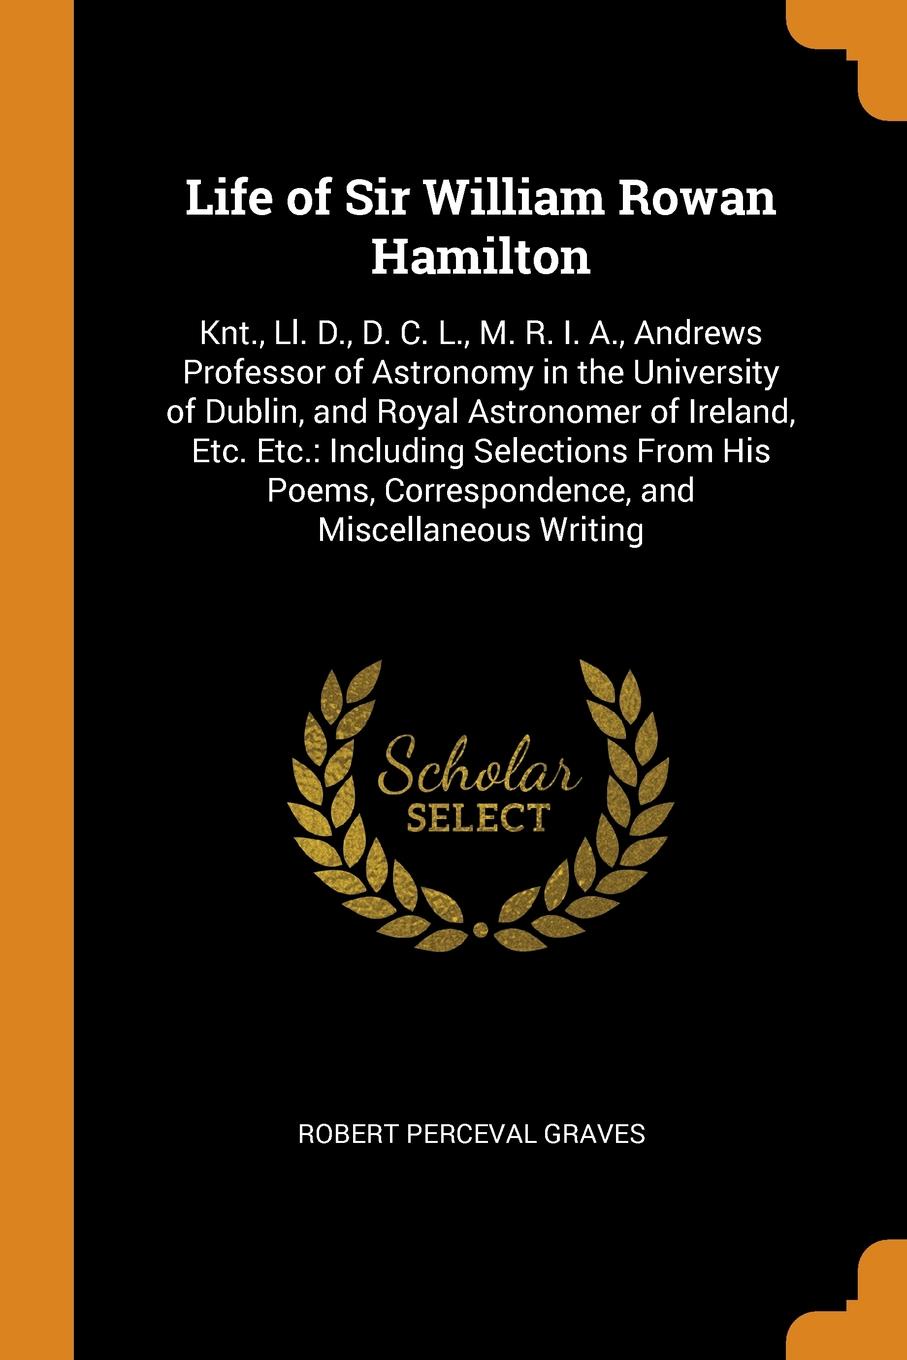 Life of Sir William Rowan Hamilton. Knt., Ll. D., D. C. L., M. R. I. A., Andrews Professor of Astronomy in the University of Dublin, and Royal Astronomer of Ireland, Etc. Etc.: Including Selections From His Poems, Correspondence, and Miscellaneous...